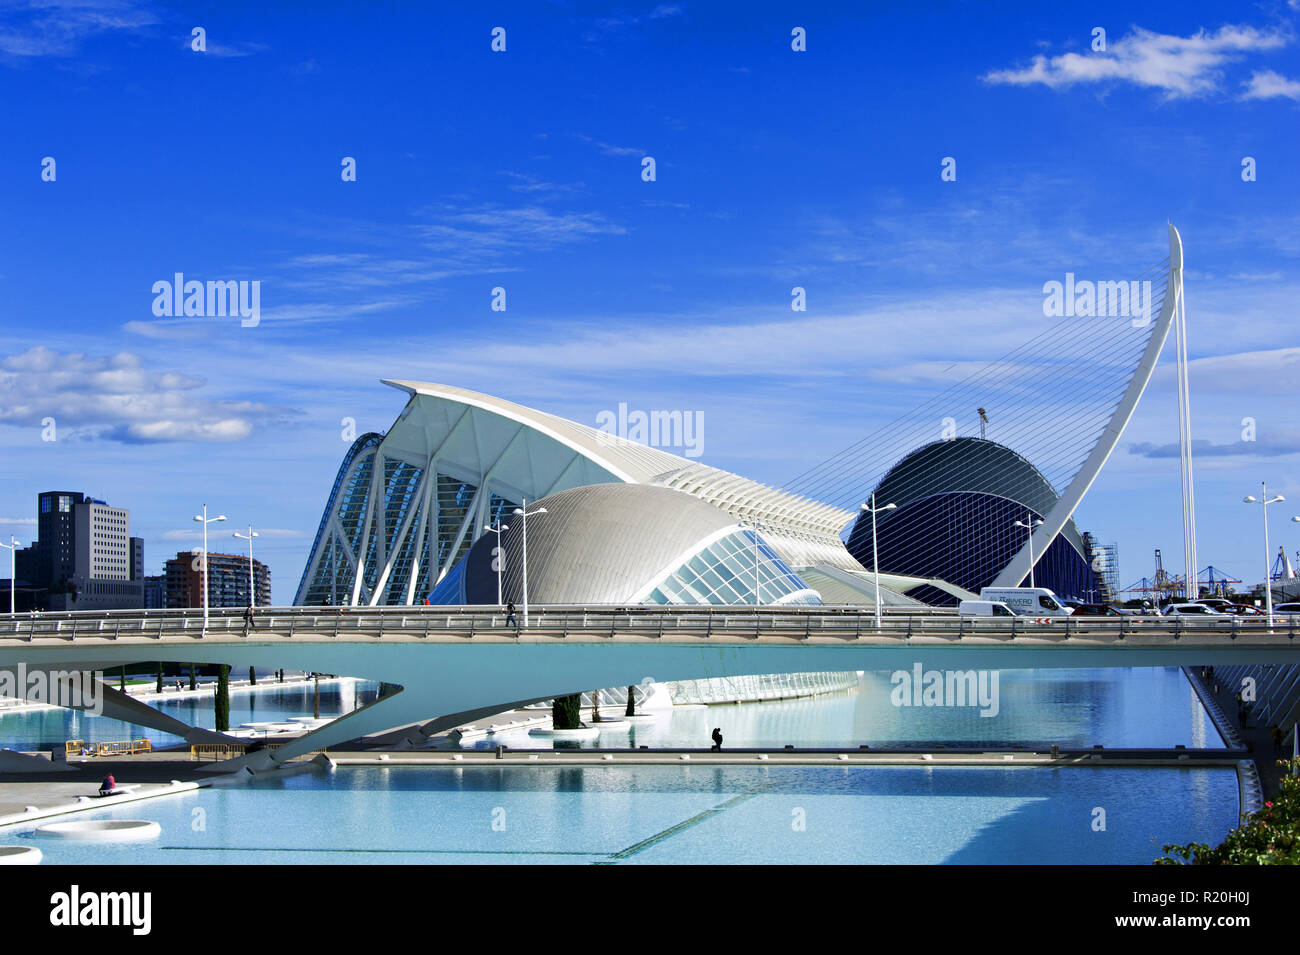 A long bridge carries the city traffic across the centre of The City of Arts and Sciences, in the background. Valencia, Spain. Stock Photo